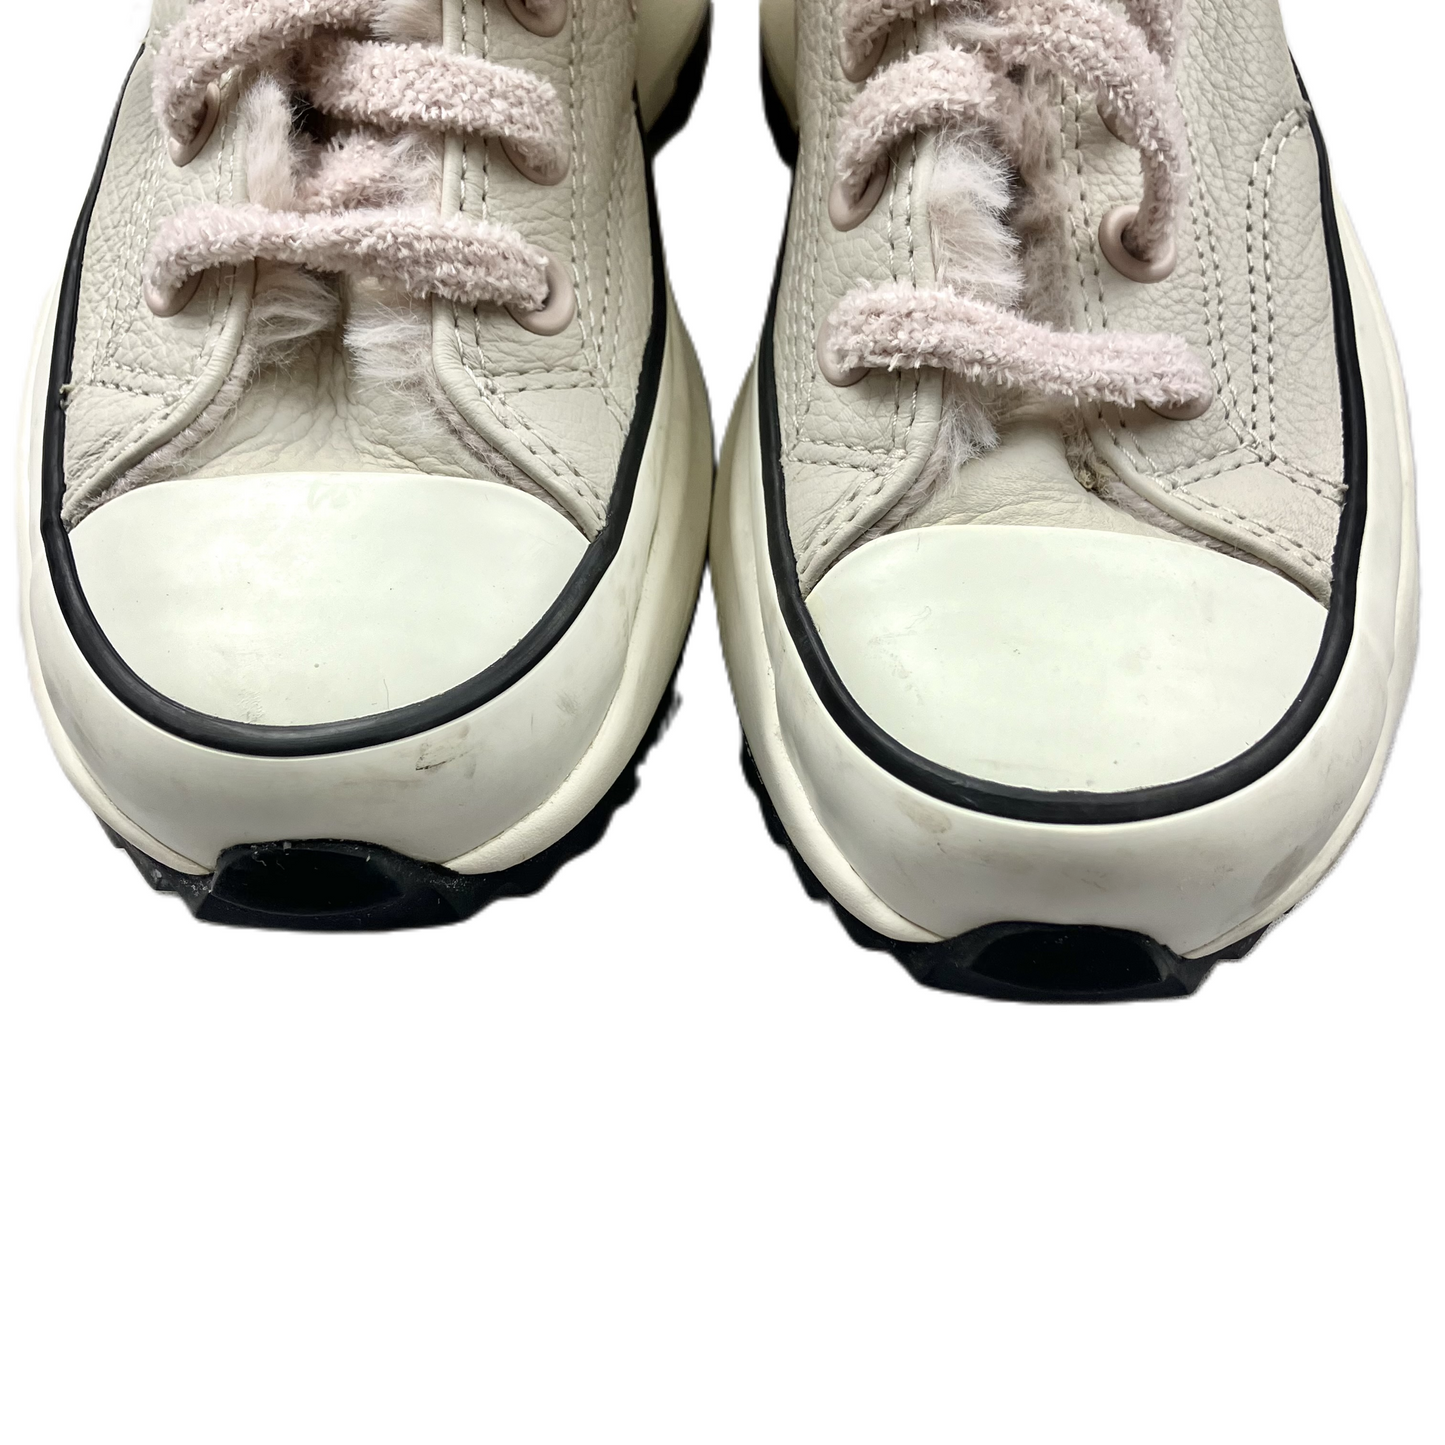 Beige Shoes Sneakers By Converse, Size: 5.5